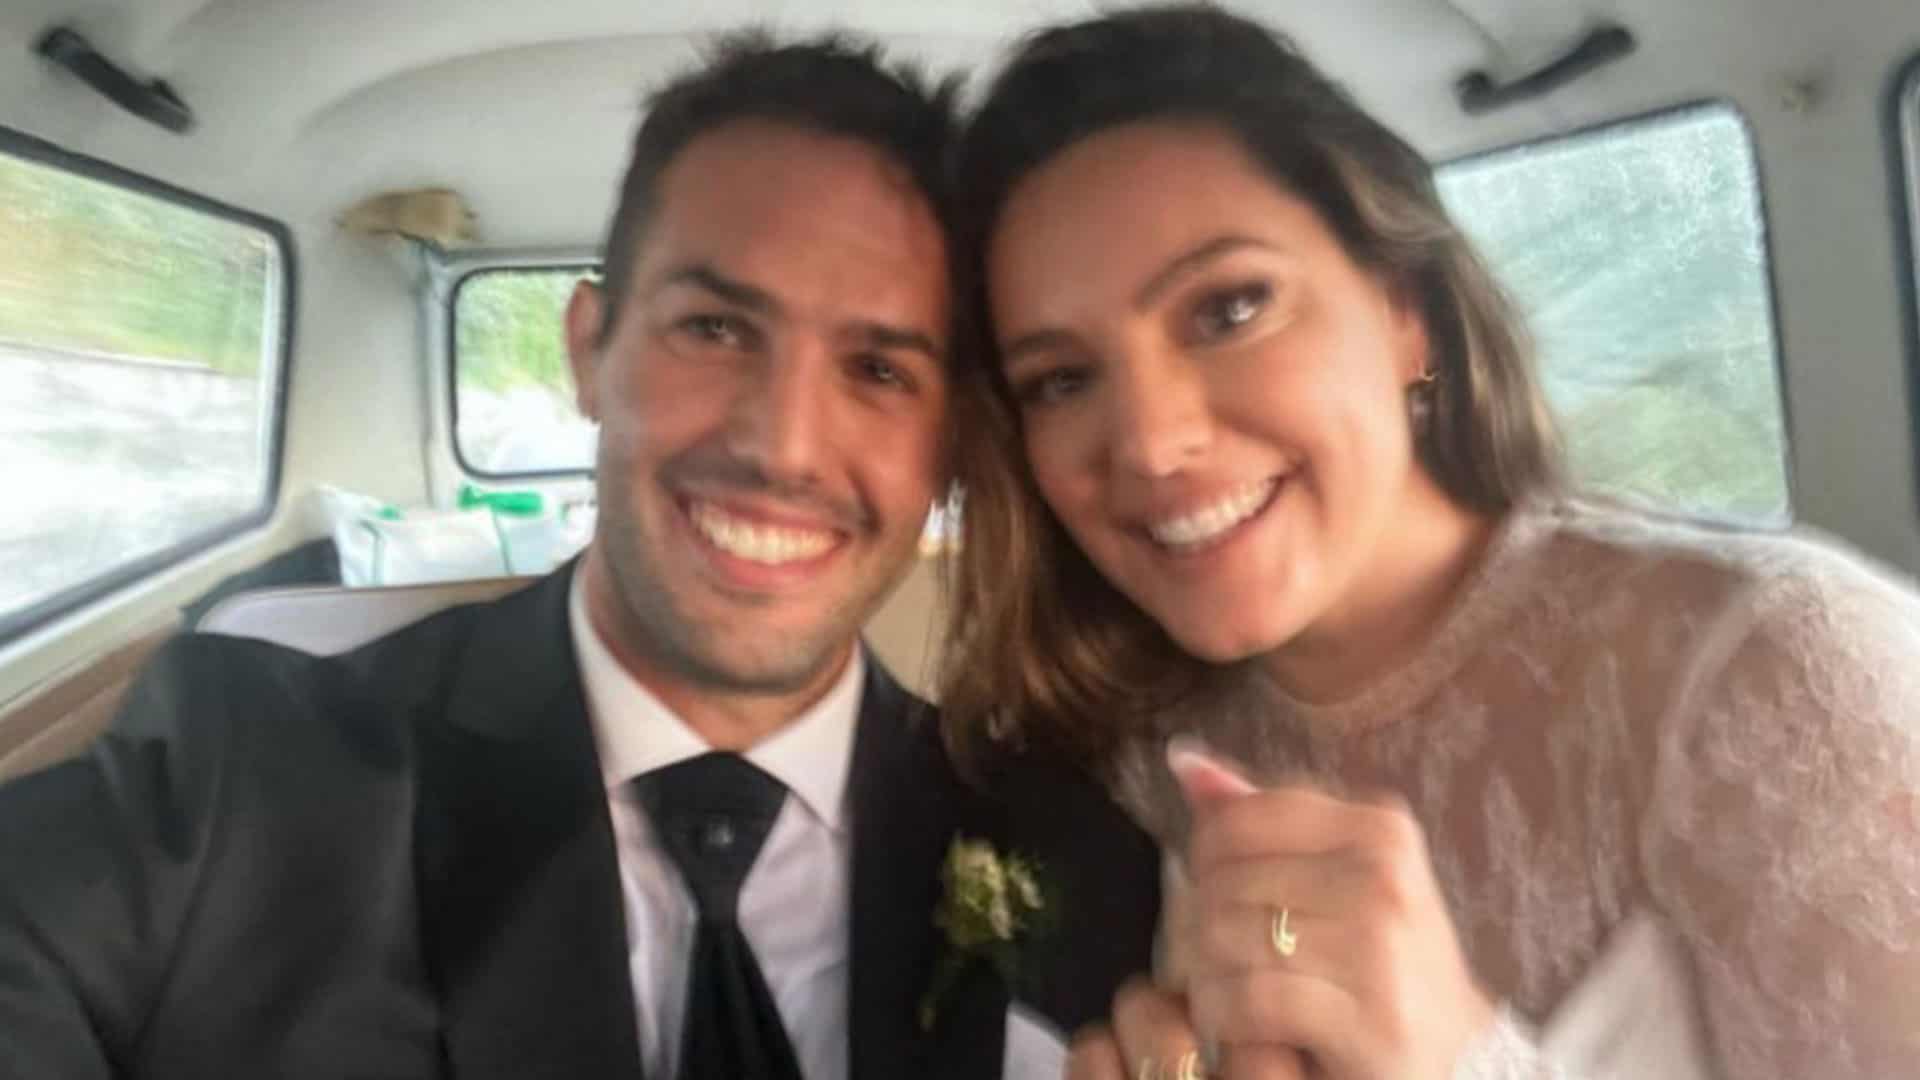 Kelly Brook and Jeremy Parisi tie the knot at stunning wedding ceremony in Italy